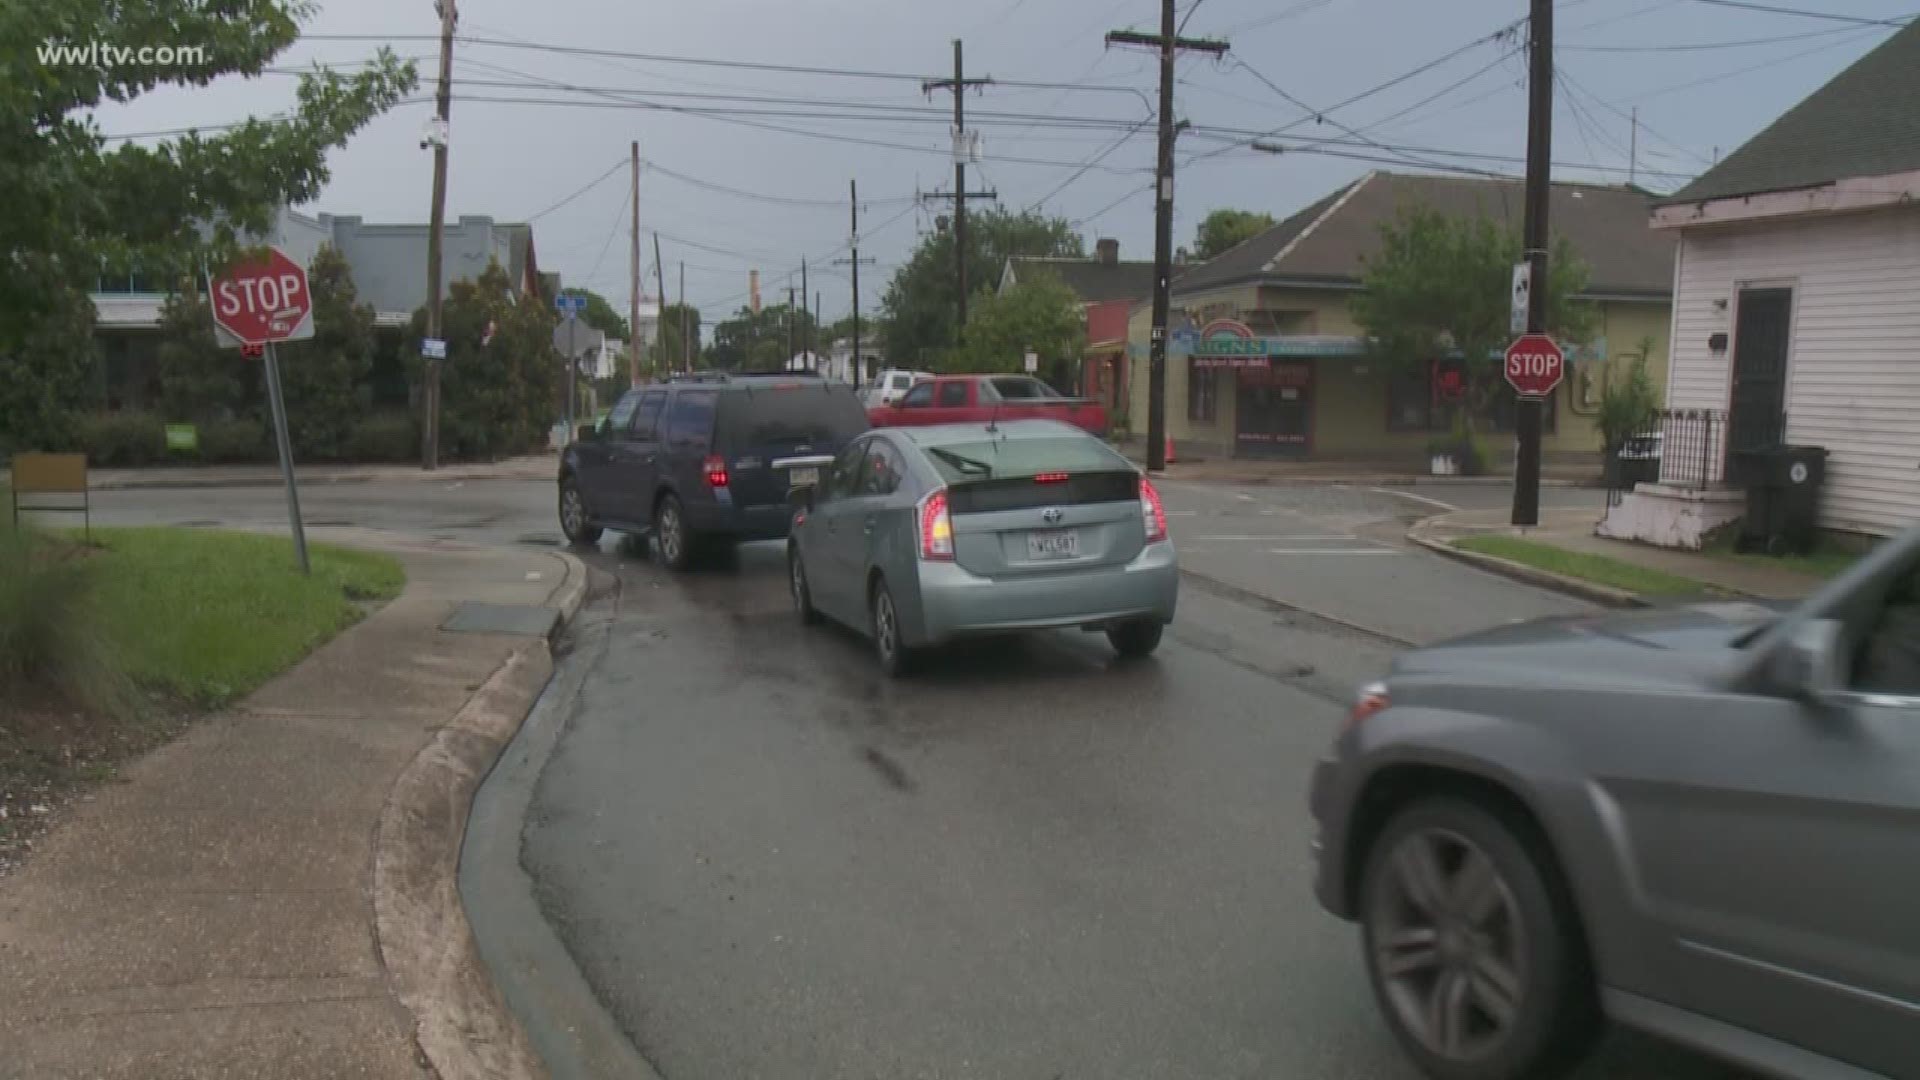 Residents who live near Oak and Eagle Streets in the Leonidas neighborhood watch accidents occur at the intersection frequently and they're waiting for the city to do something about it.